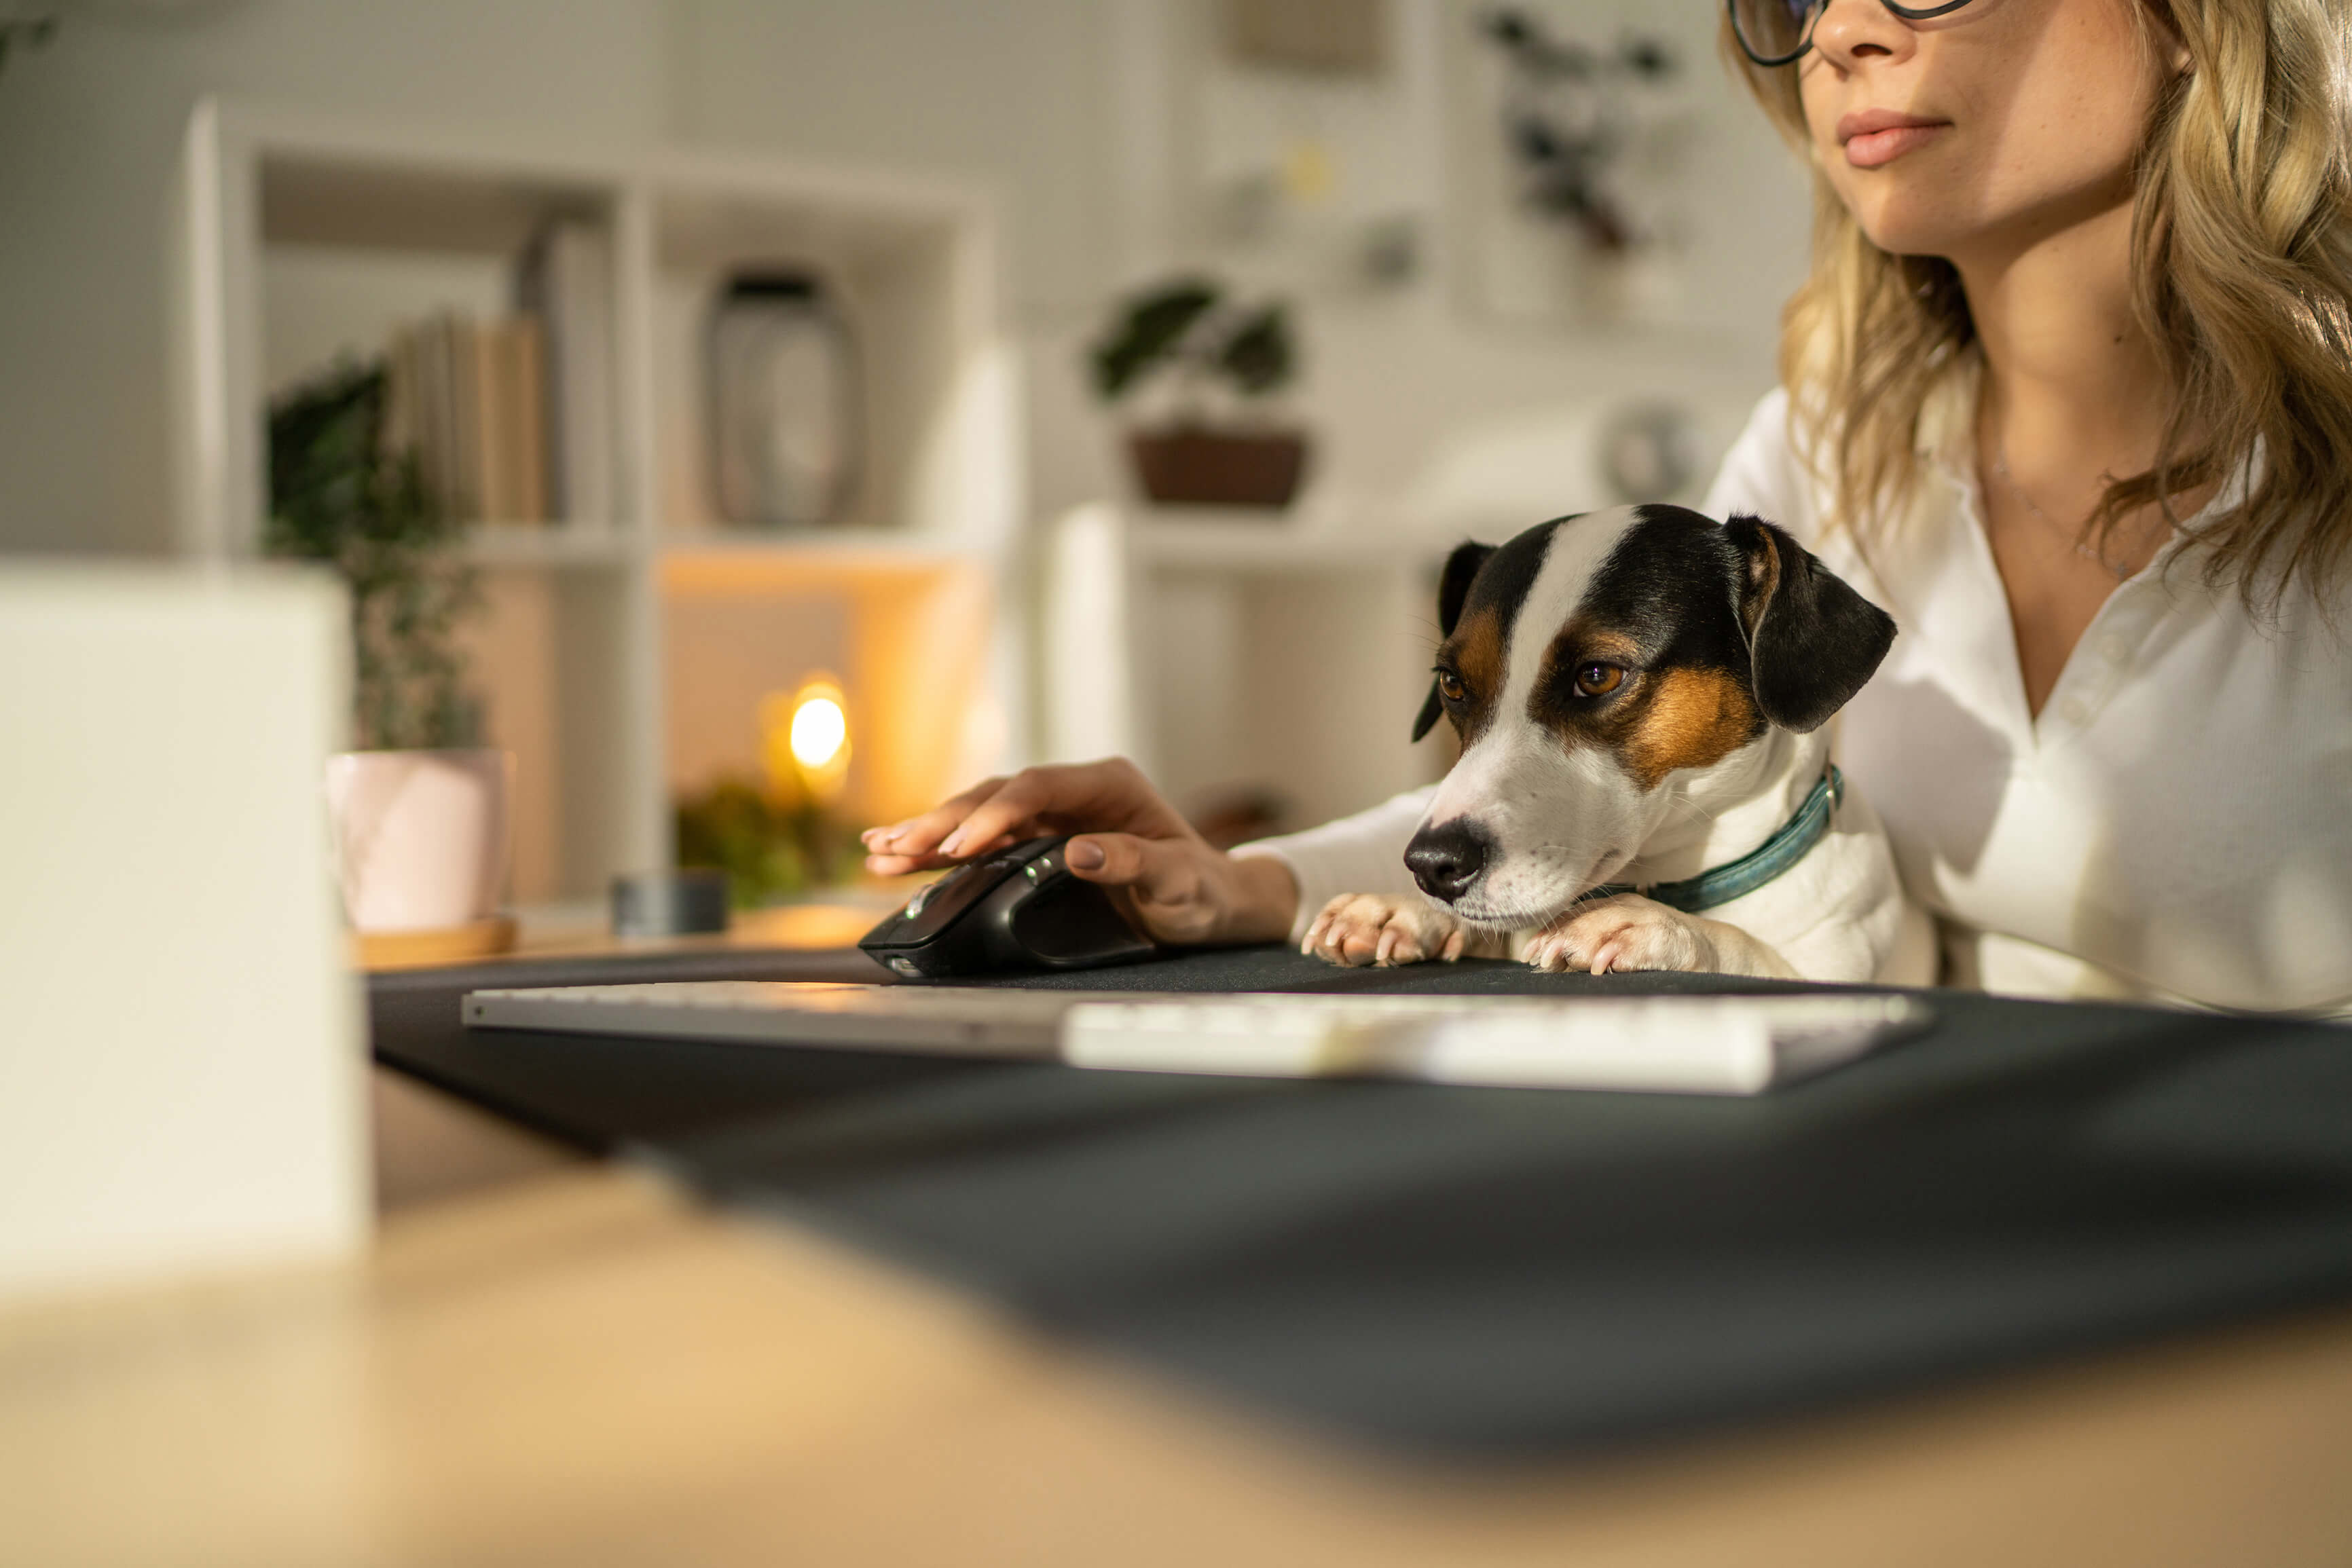 Lady at a computer with a dog on her lap